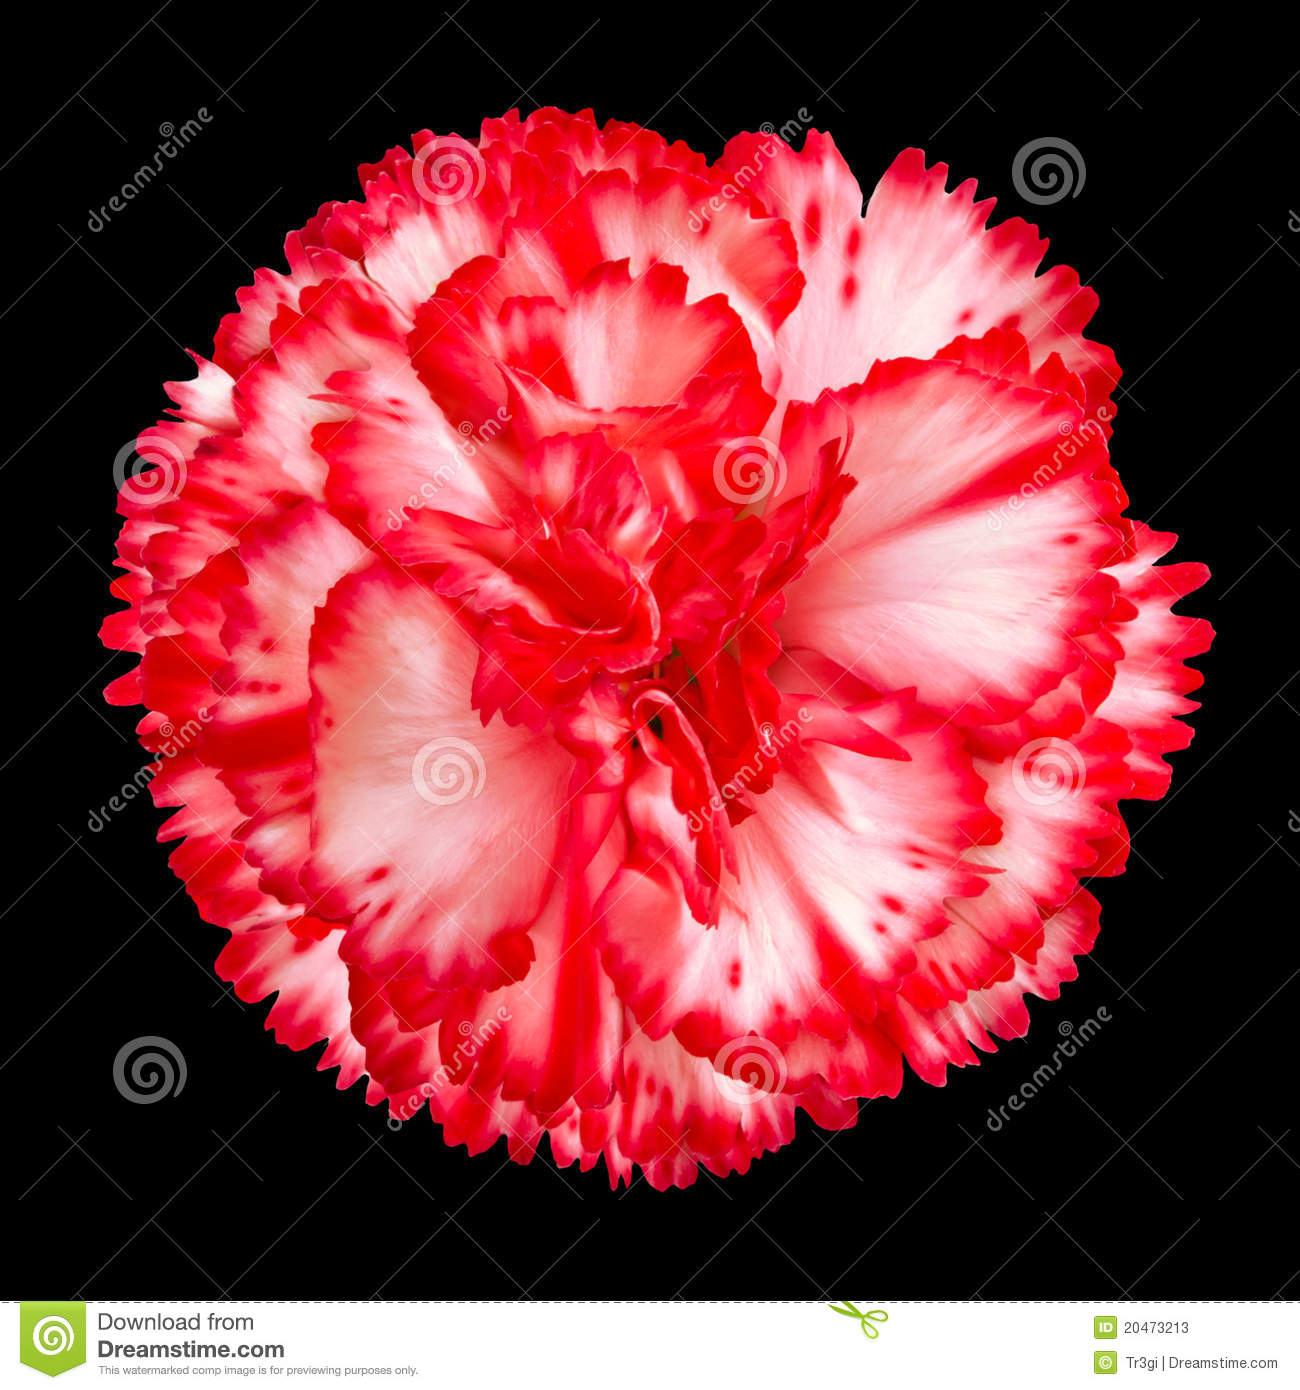 Red And White Carnation Flower Isolated Stock Photos   Image  20473213